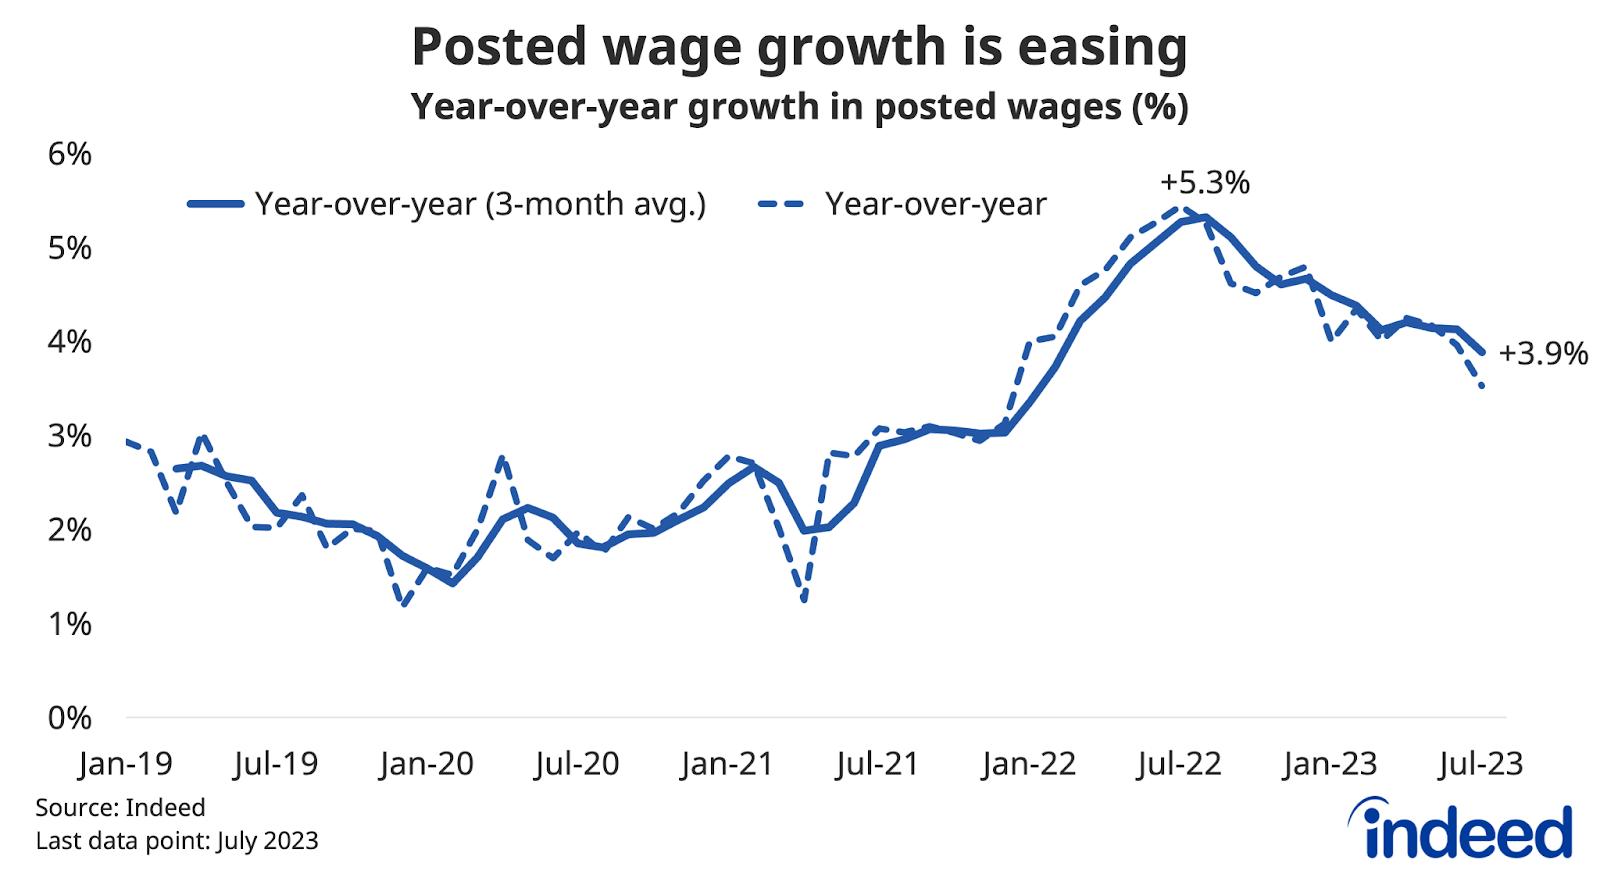 Line chart titled “Posted wage growth is easing,” shows the year-over-year growth of Canadian posted wages on Indeed, and its three-month average between January 2019 and July 2023. Posted wage growth peaked in summer 2022 at 5.3%, but has cooled since, to 3.9% as of July. 